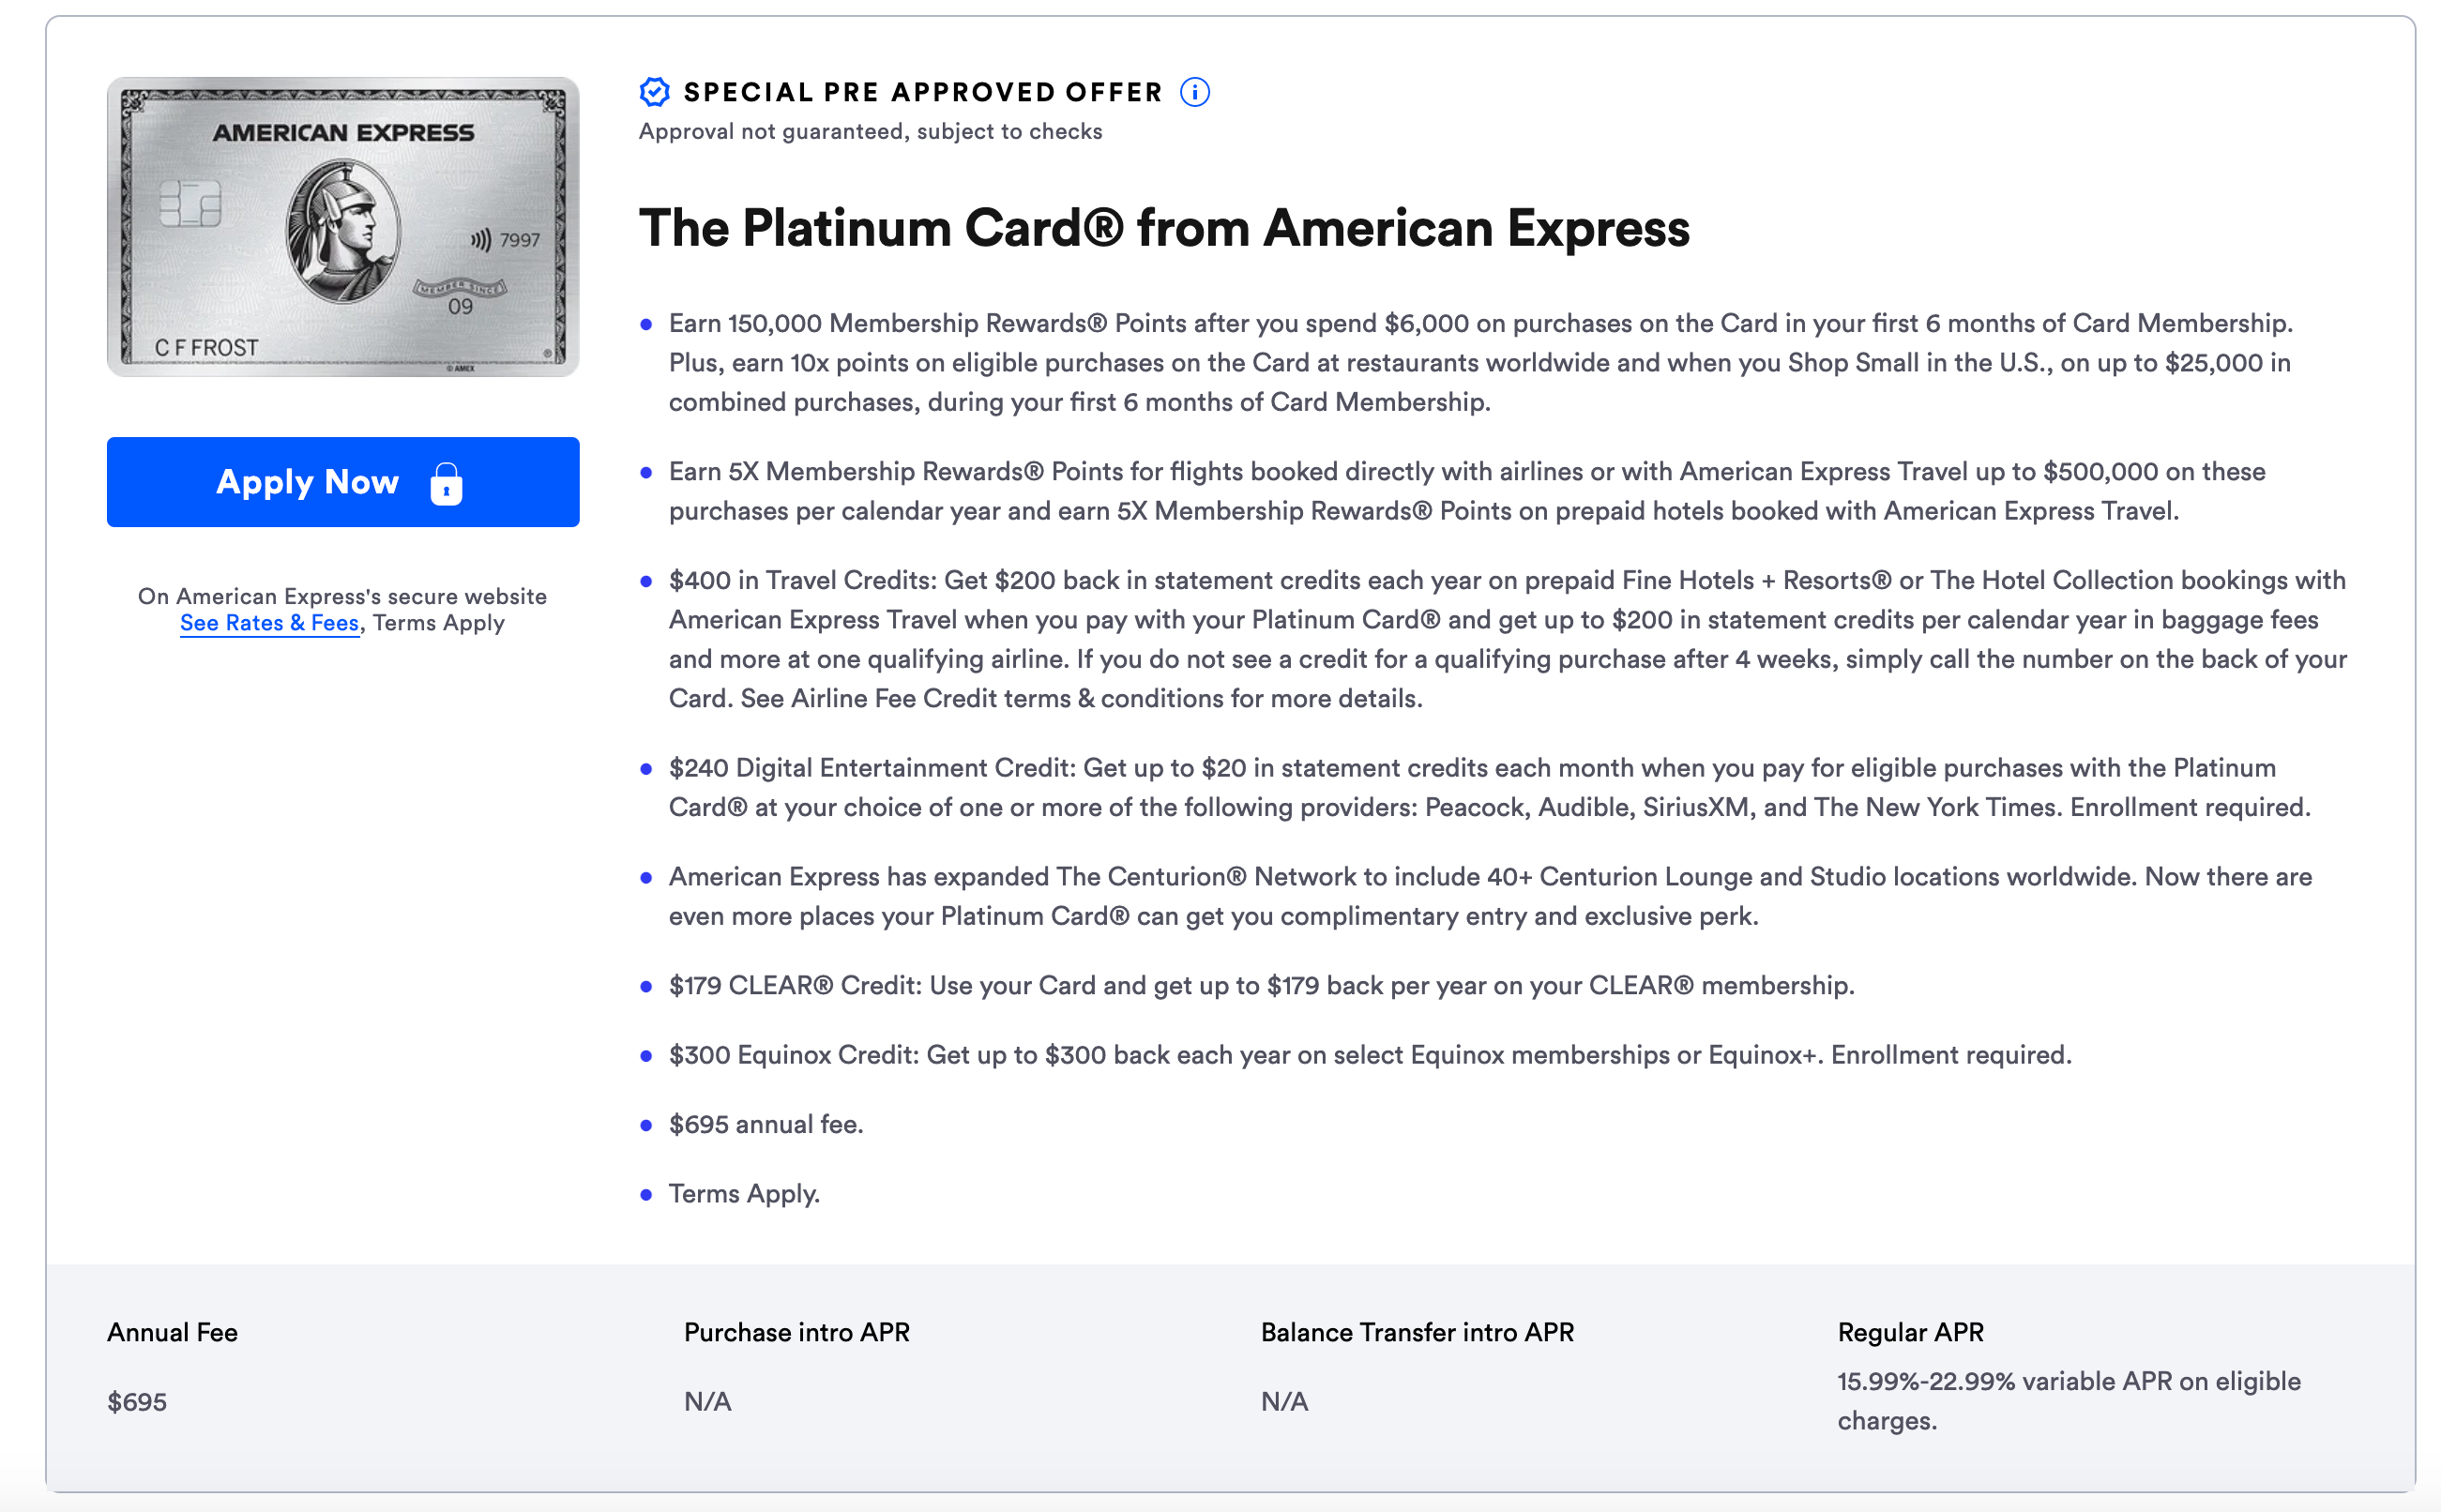 The Platinum Card® from American Express Preapproved Offer